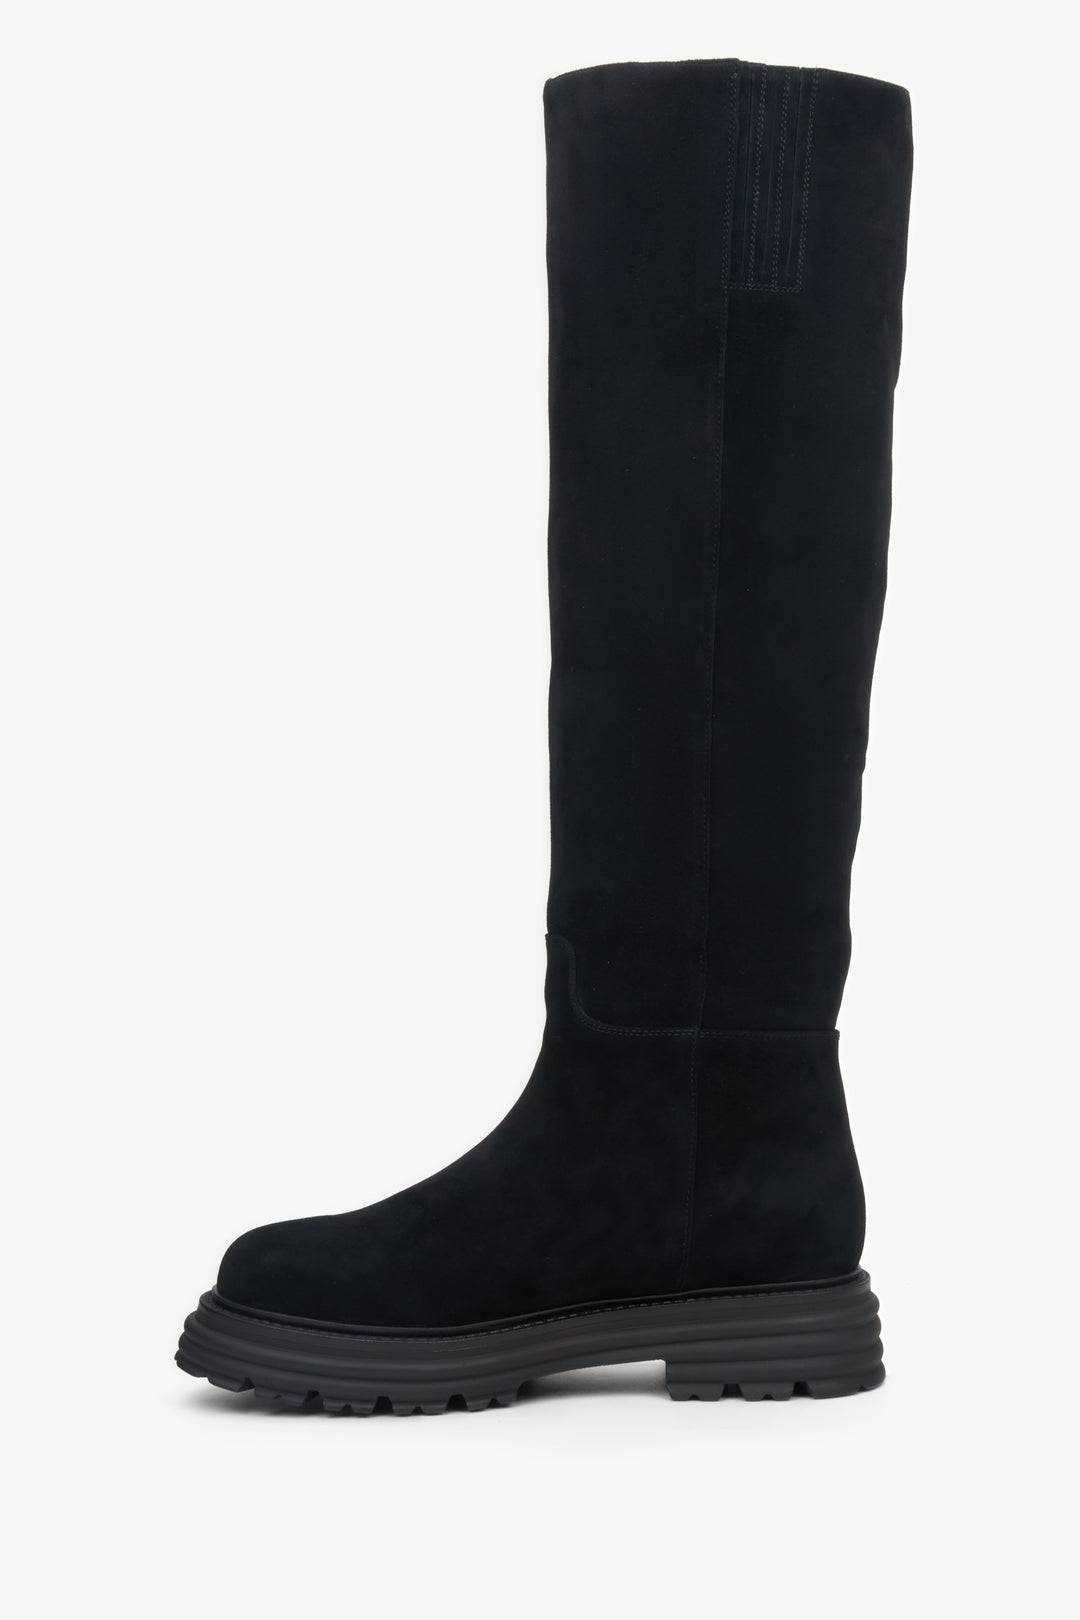 Women's black velour knee-high boots with wide calf - shoe profile.